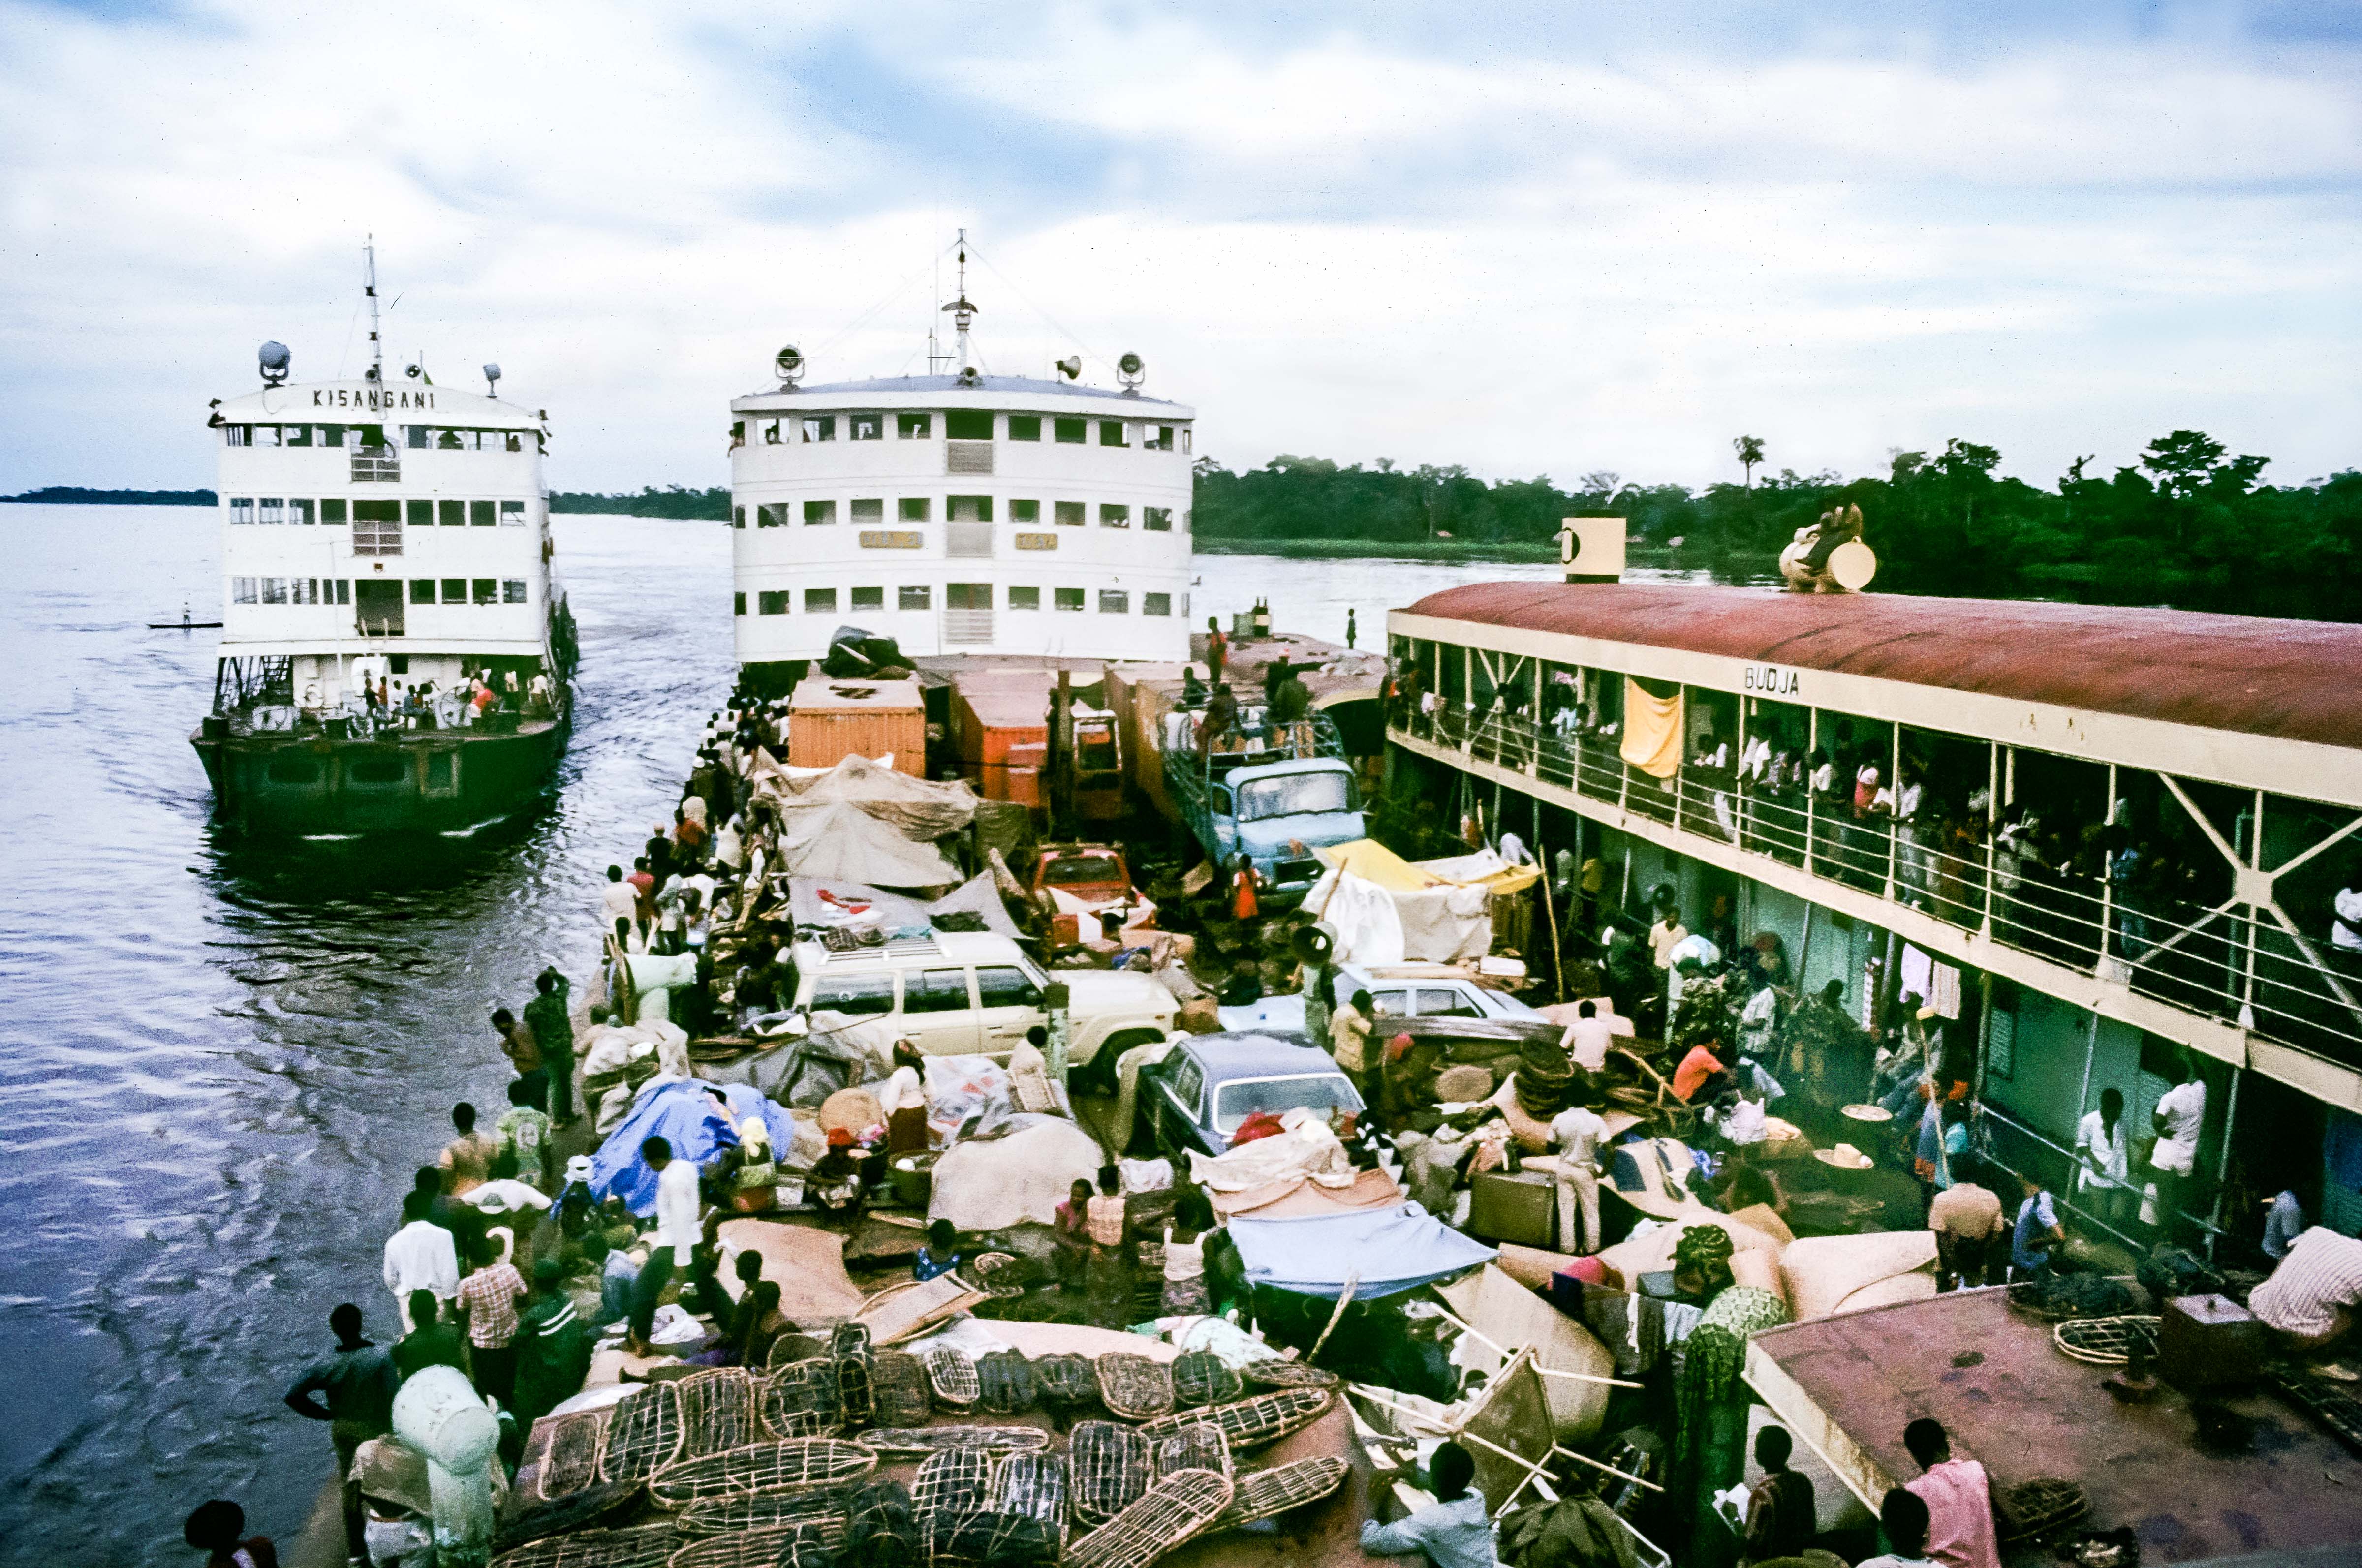 Congo Zaire, River Boat with Barges, 1984